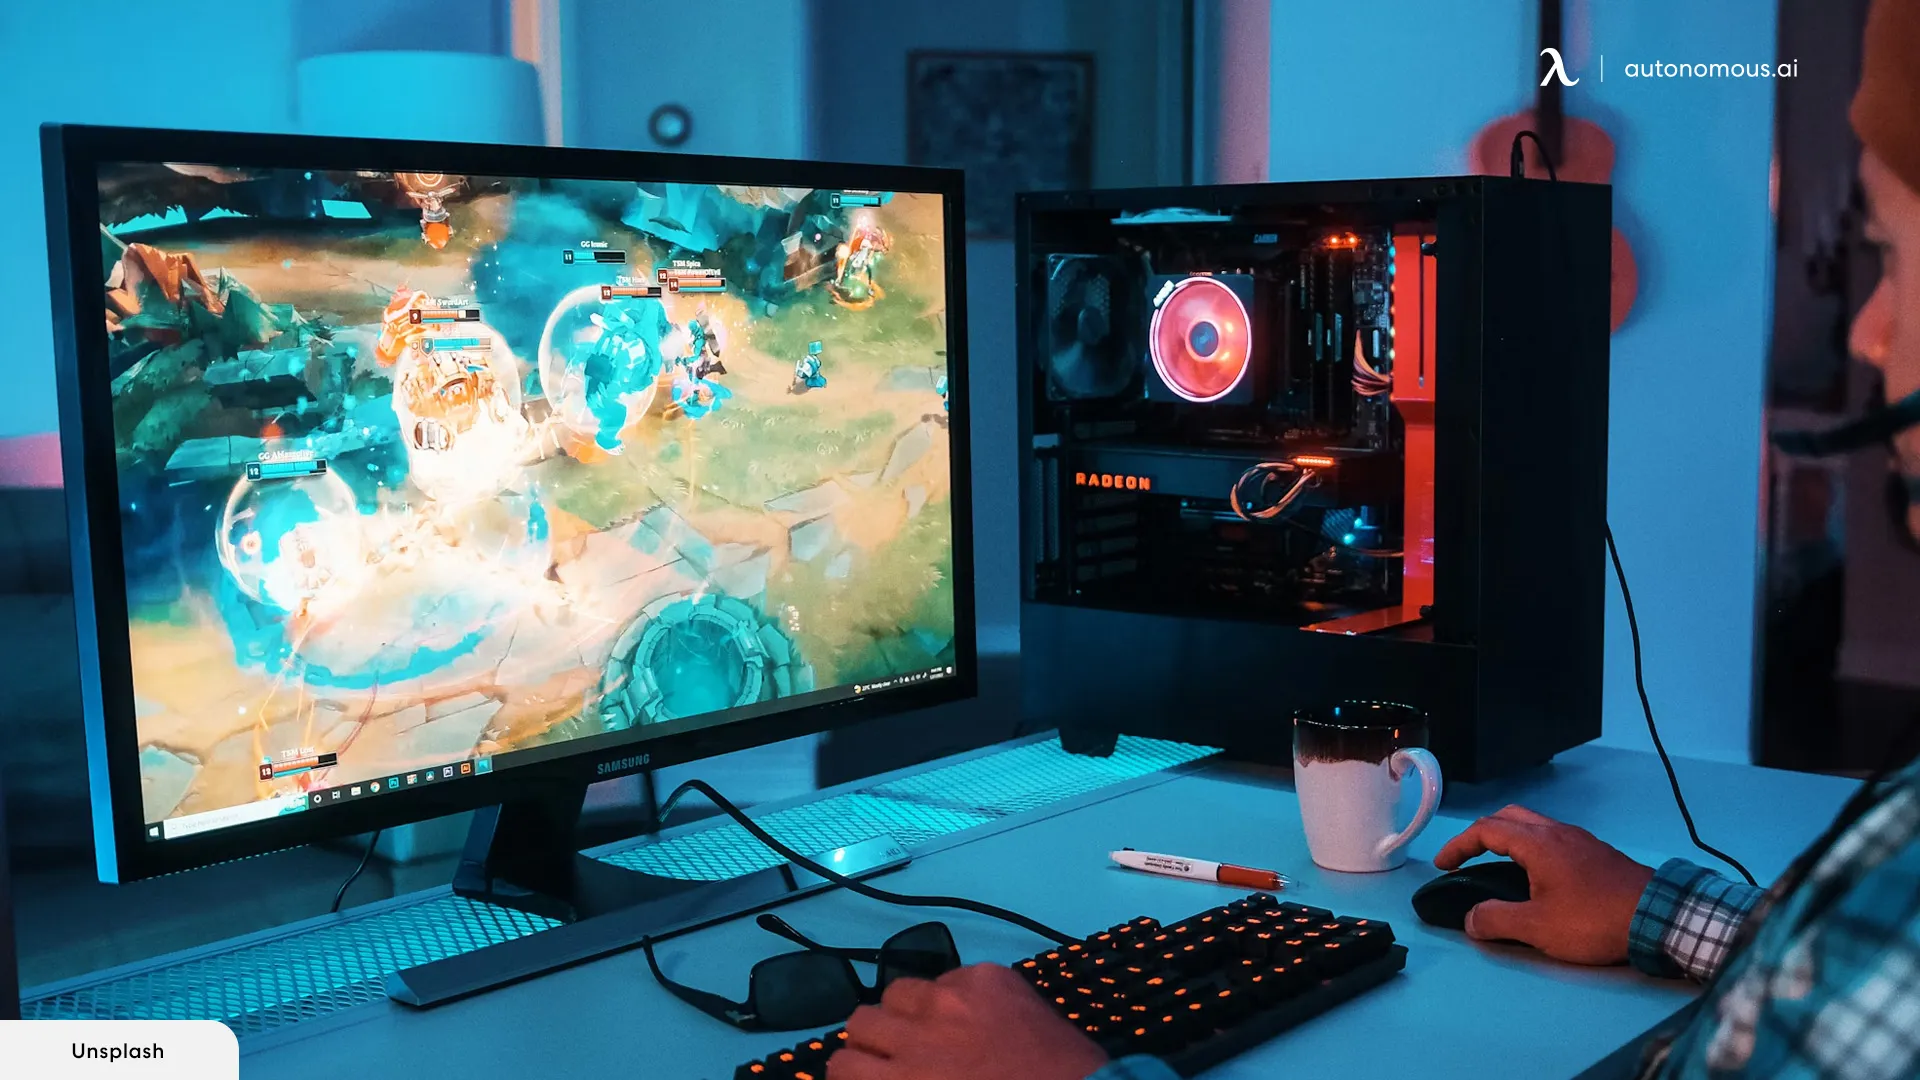 The Best Gaming PC Build for 1,000 Dollars